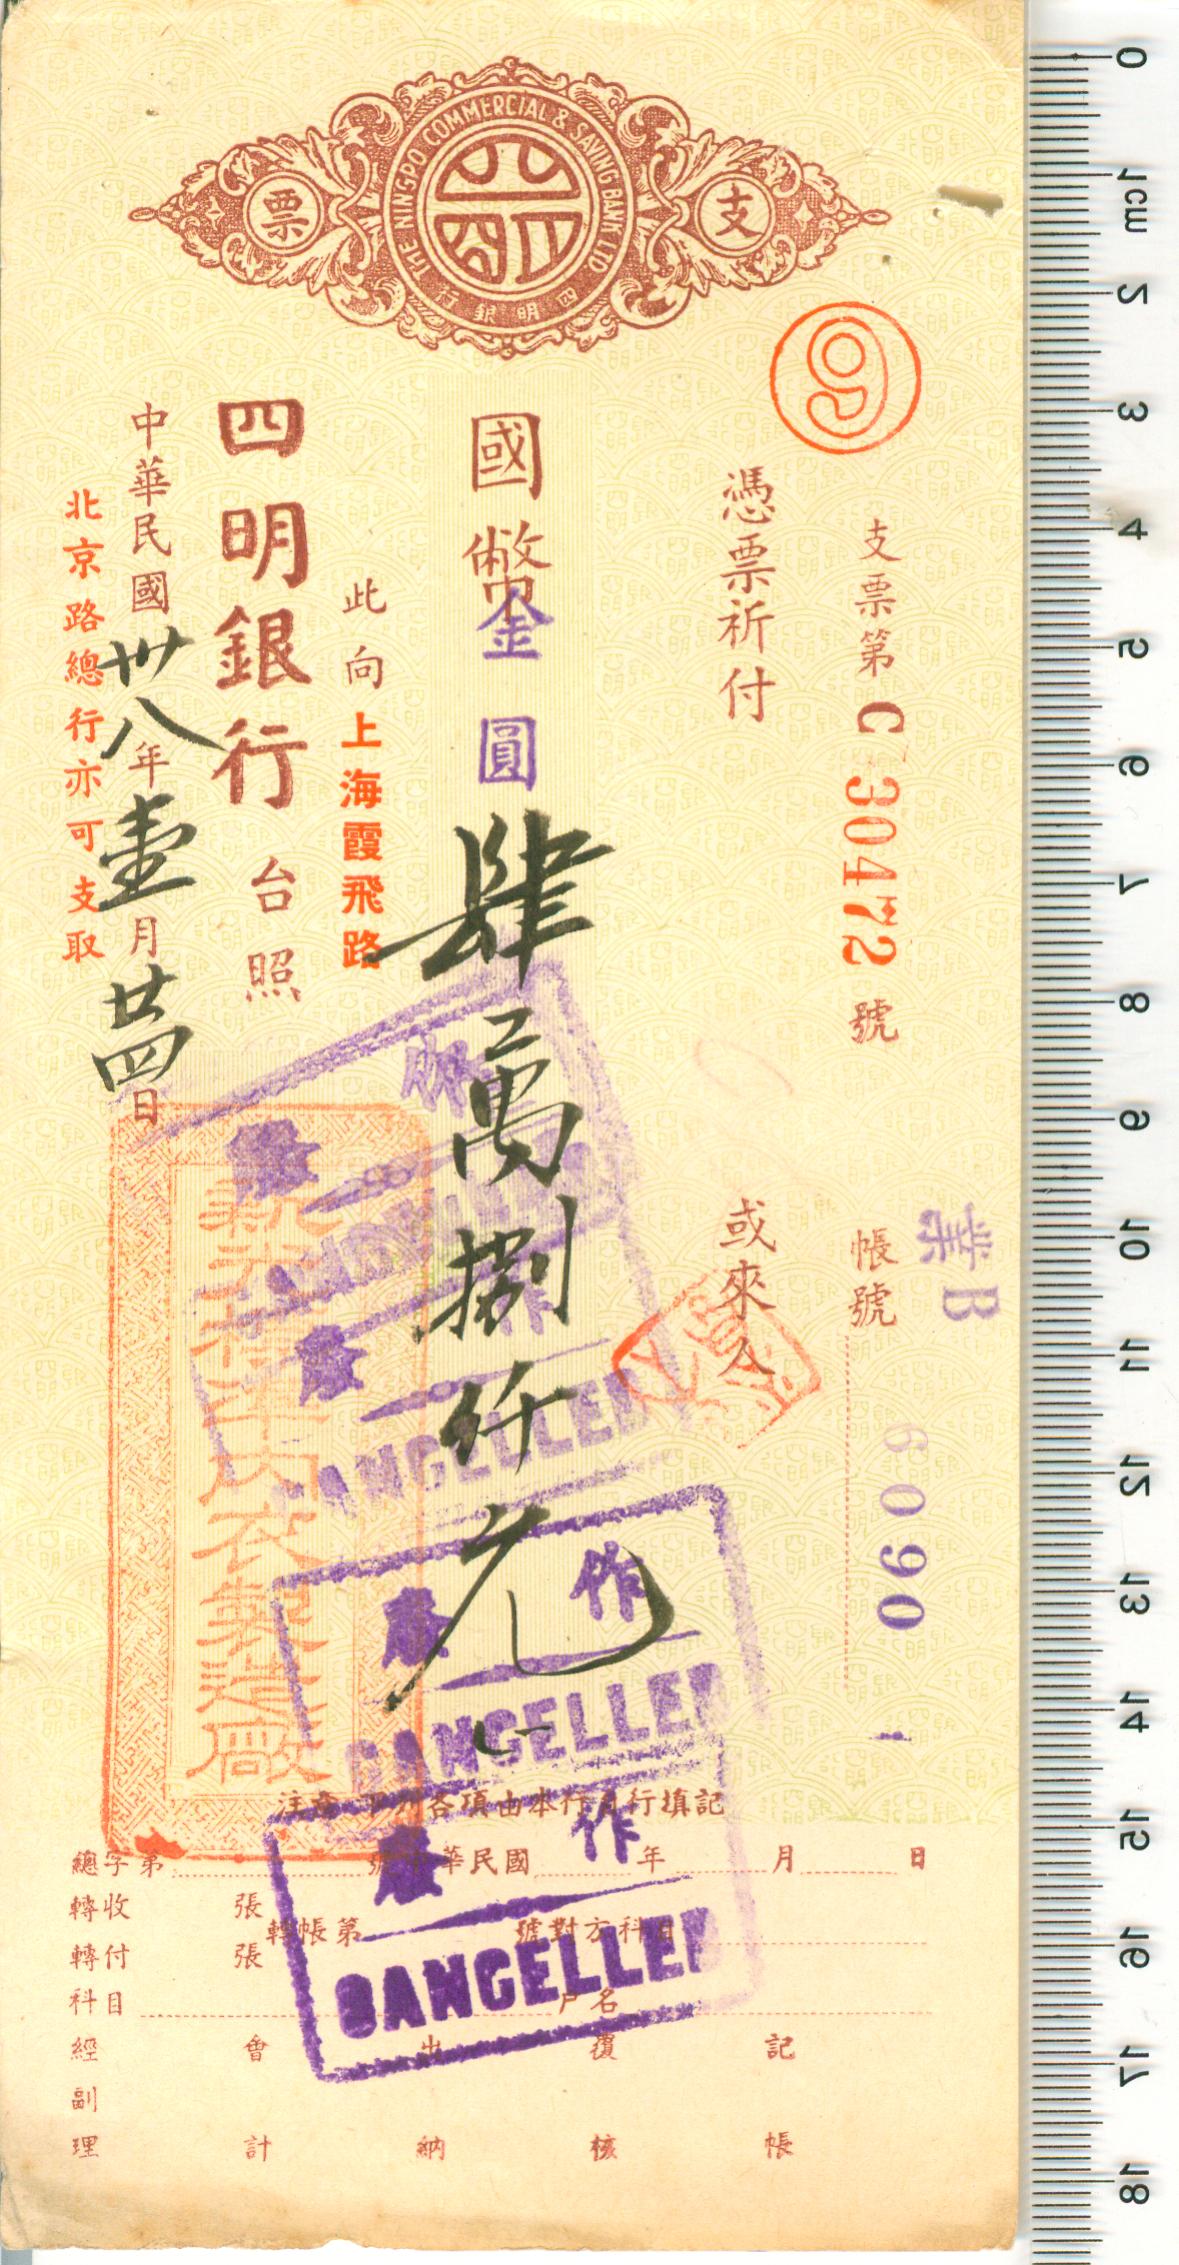 D1730, Check of Ningbo Commercial and Saving Bank, Shanghai 1949 Cheque